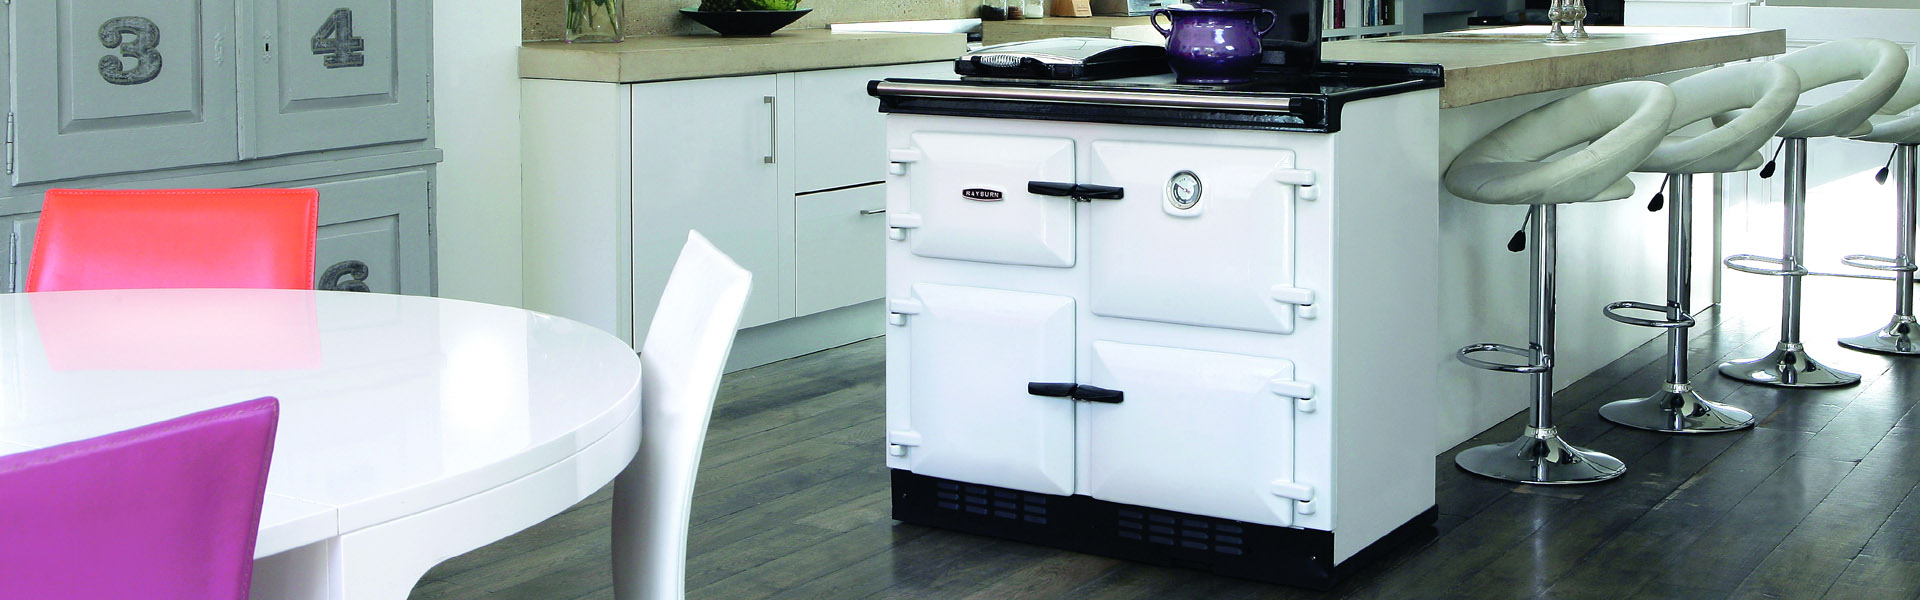 Main Image for Rayburn Cooker Servicing Page